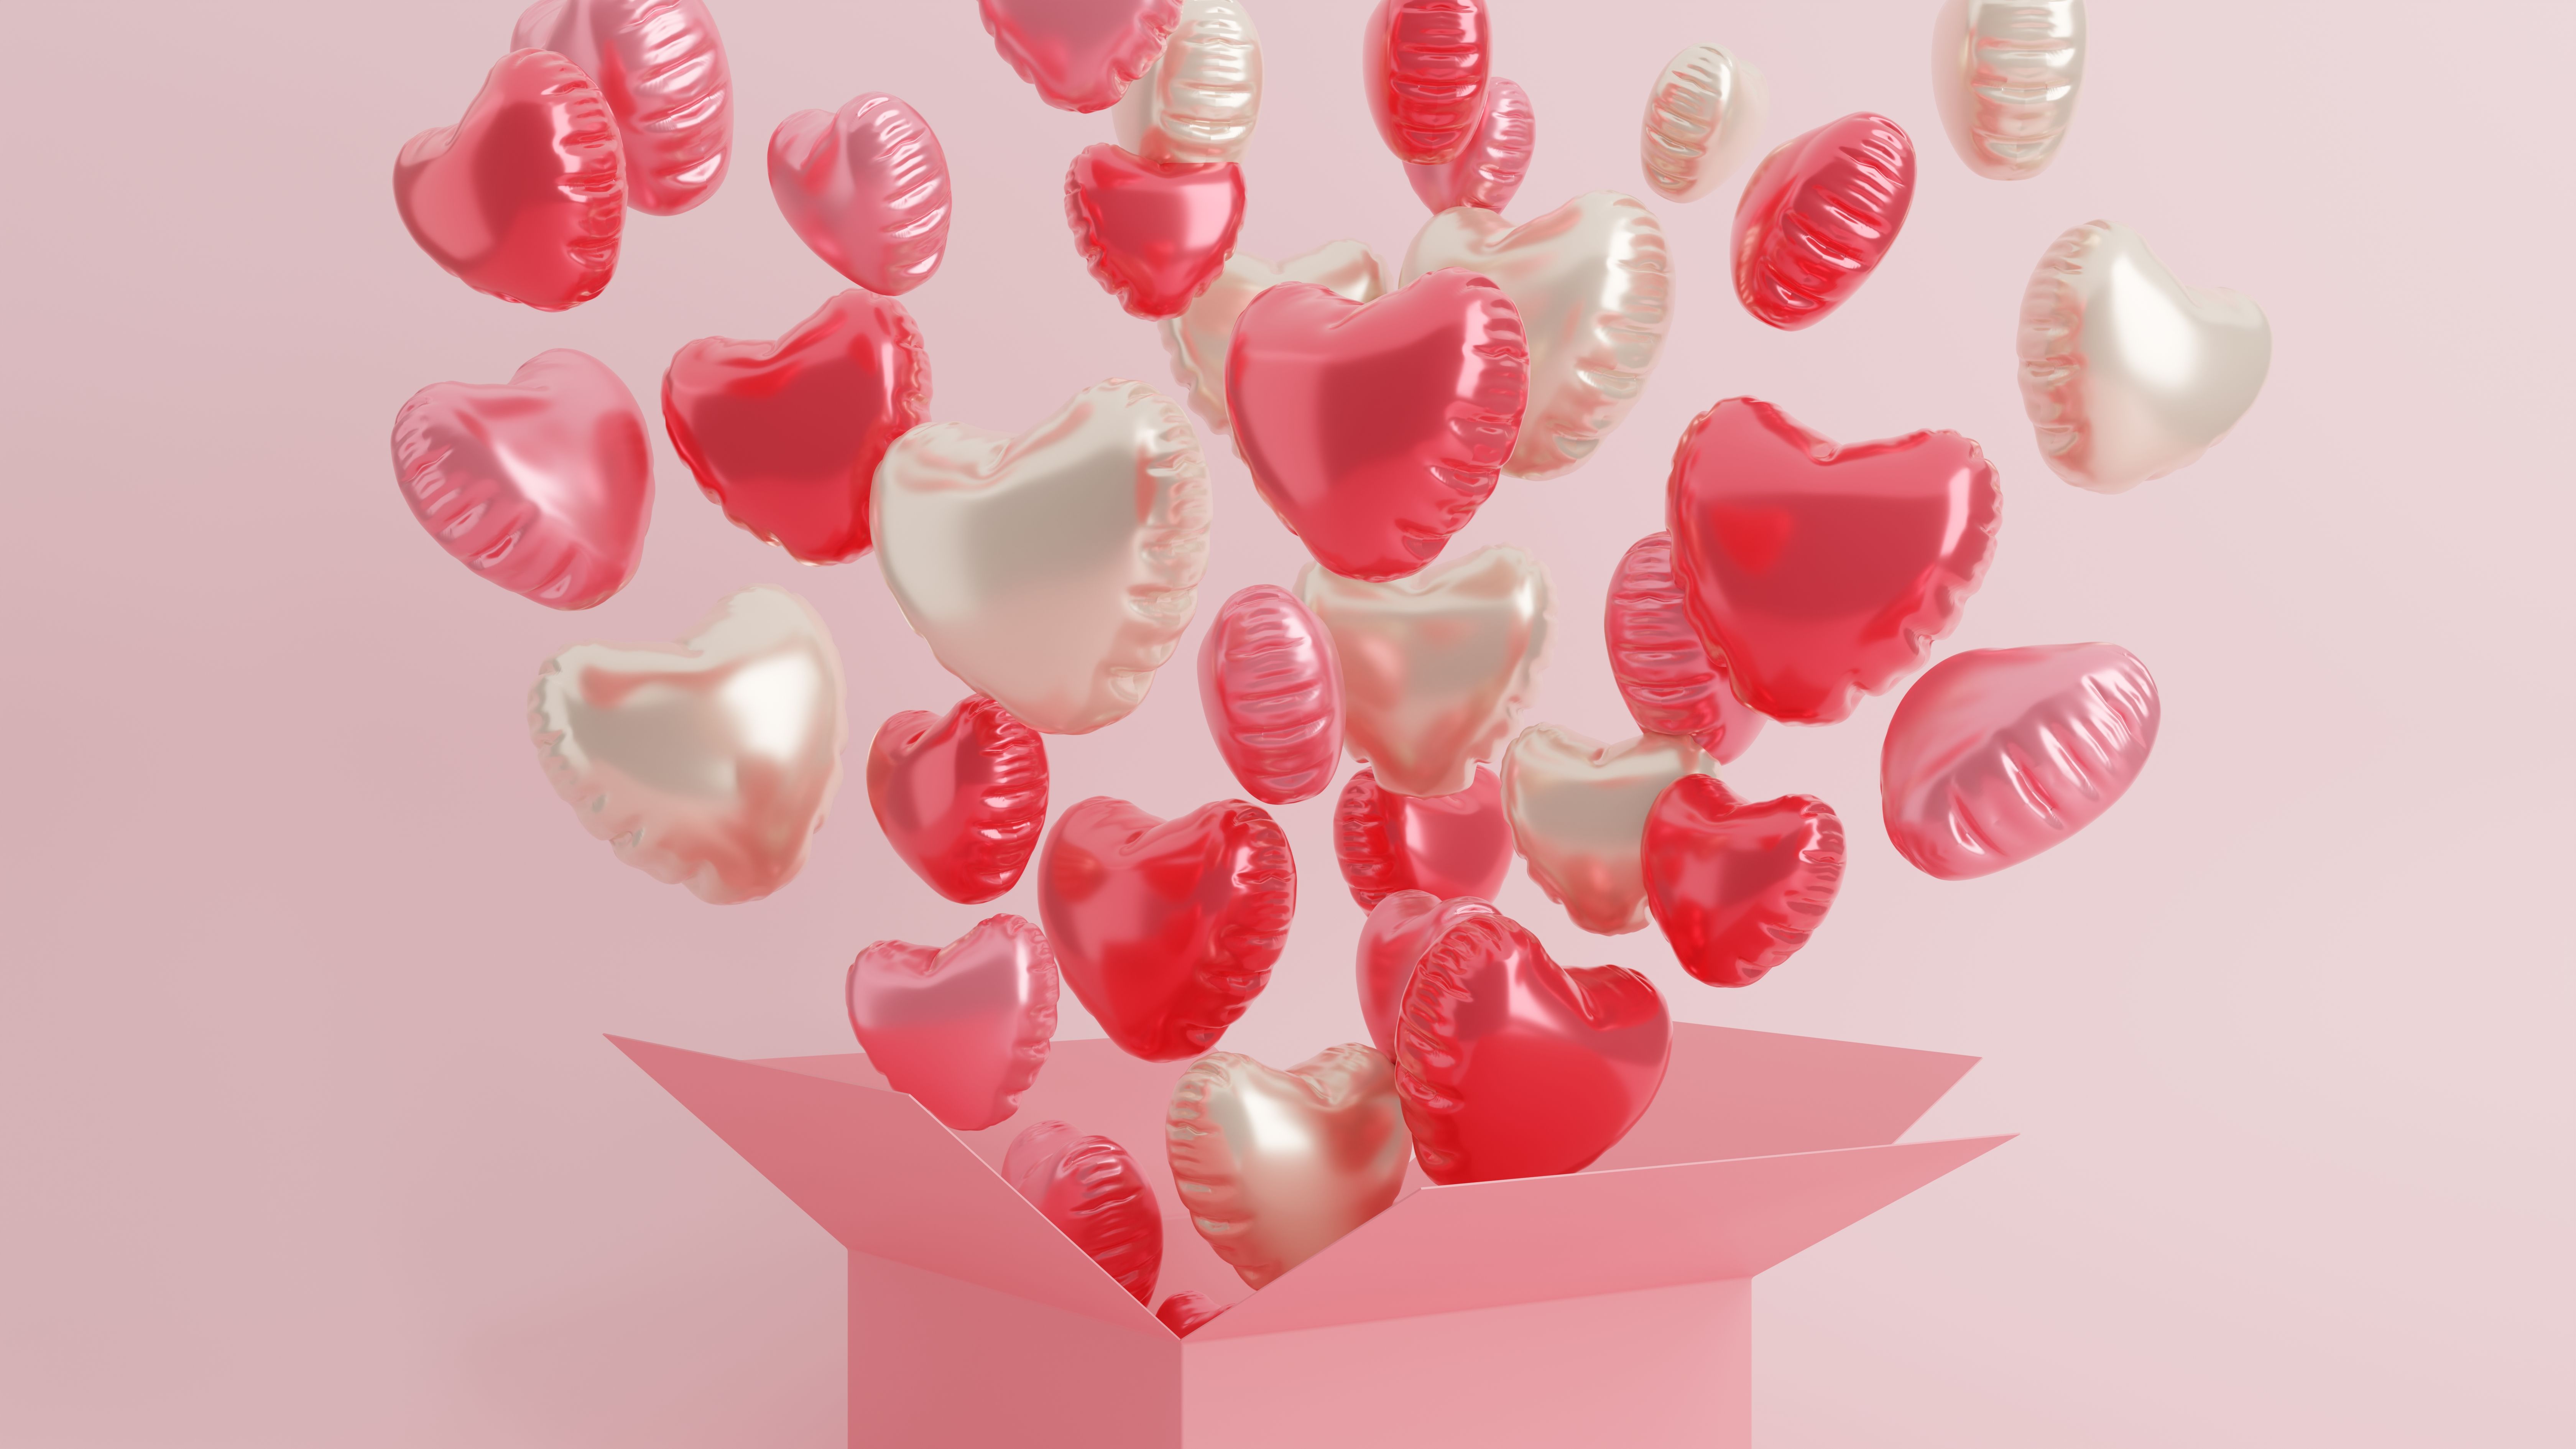 https://hips.hearstapps.com/hmg-prod/images/heart-shape-balloon-gift-box-background-royalty-free-image-1707757161.jpg?crop=1xw:0.75589xh;center,top